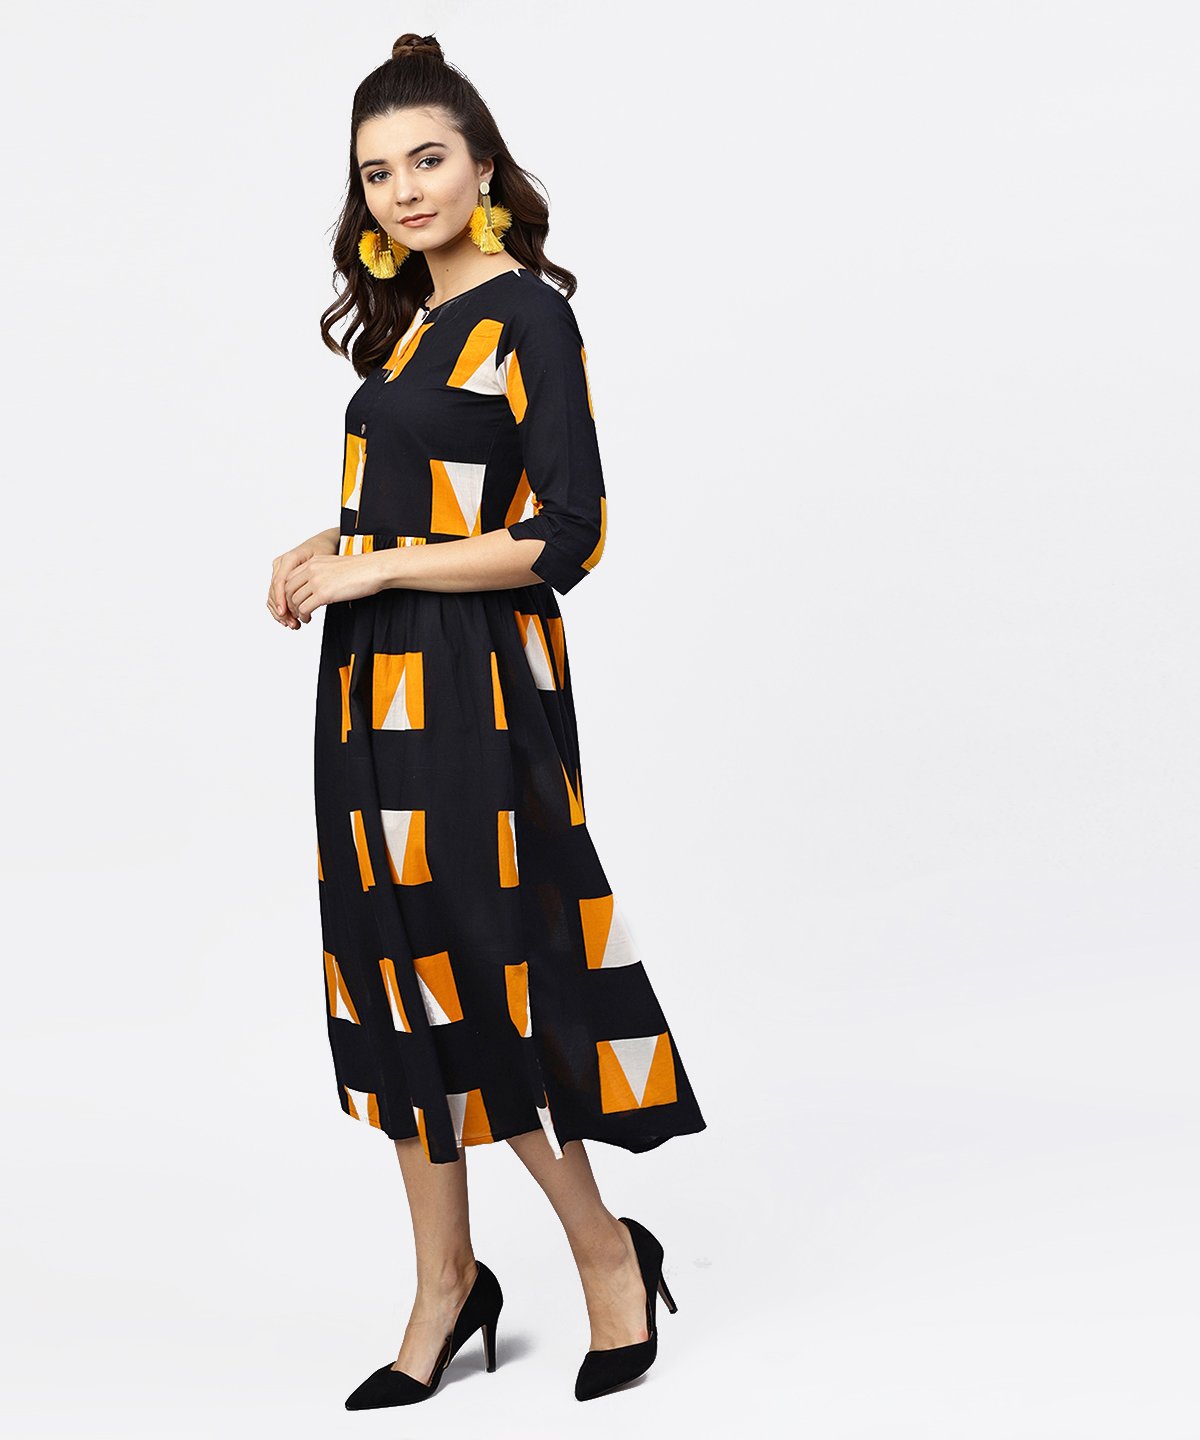 Women's Black Round Neck Printed Dress With Front Placket And 3/4 Sleeves - Nayo Clothing